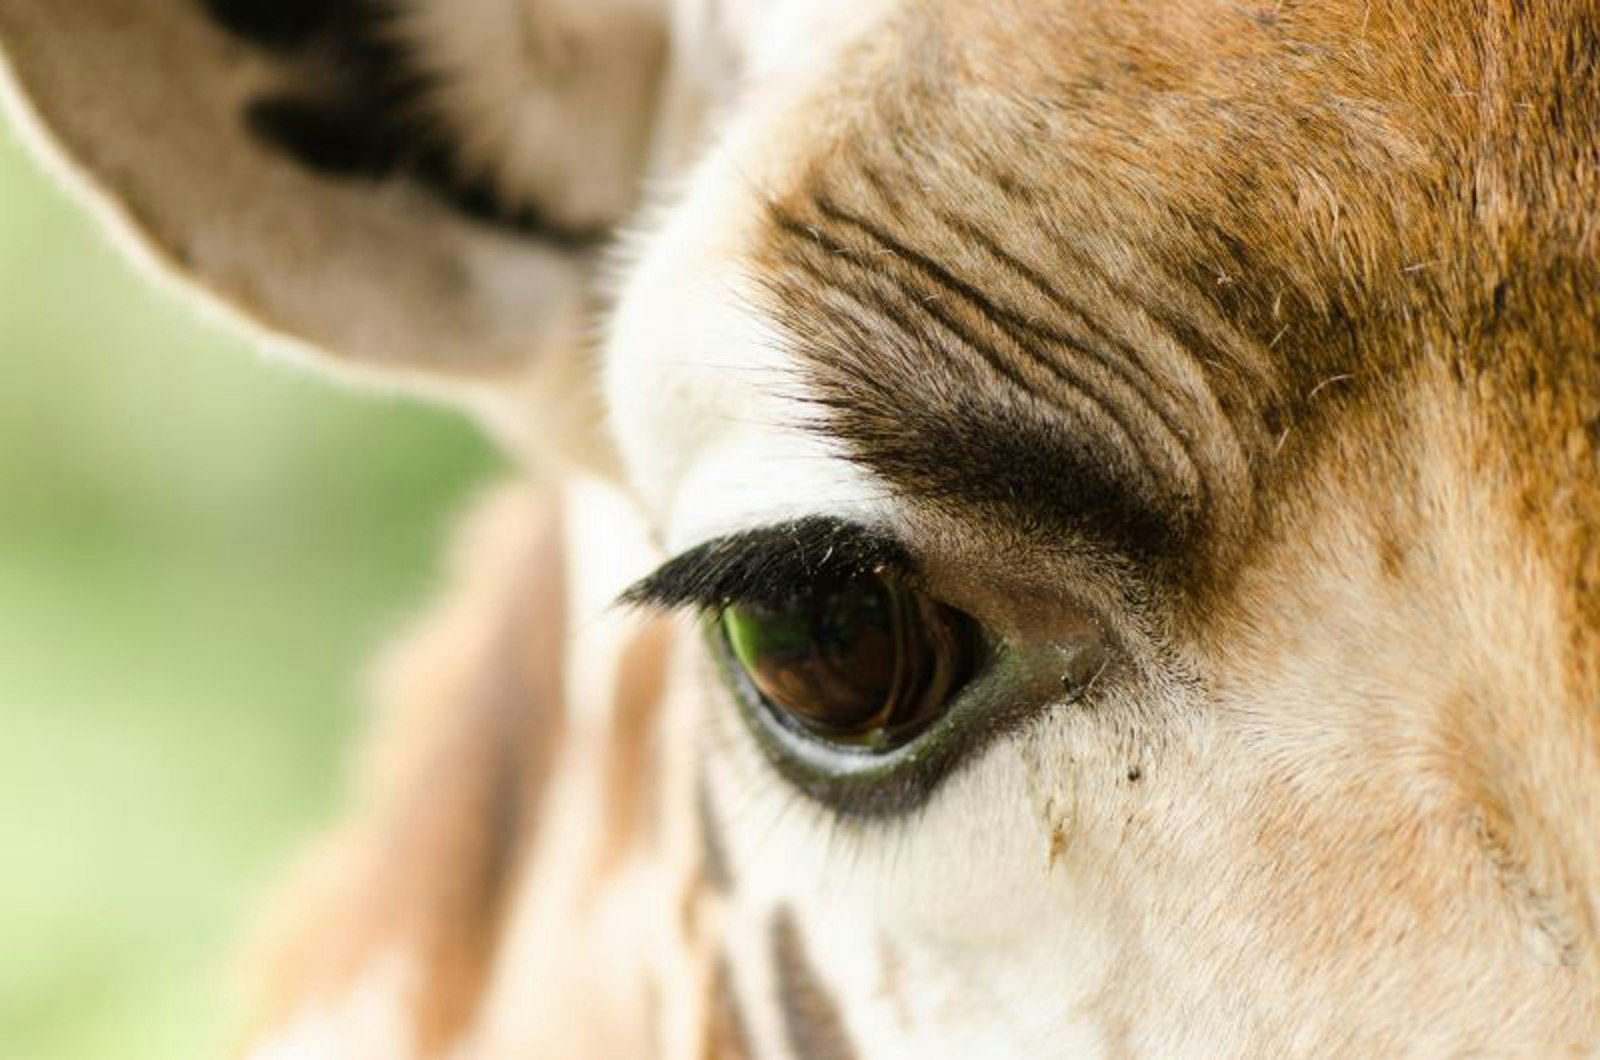 A close up shot of a giraffe's head, with its right eye at the centre of the image. It's brow is furled and its eye lashes and eye brows are very distinct© Andrew Geimar / Lonely Planet